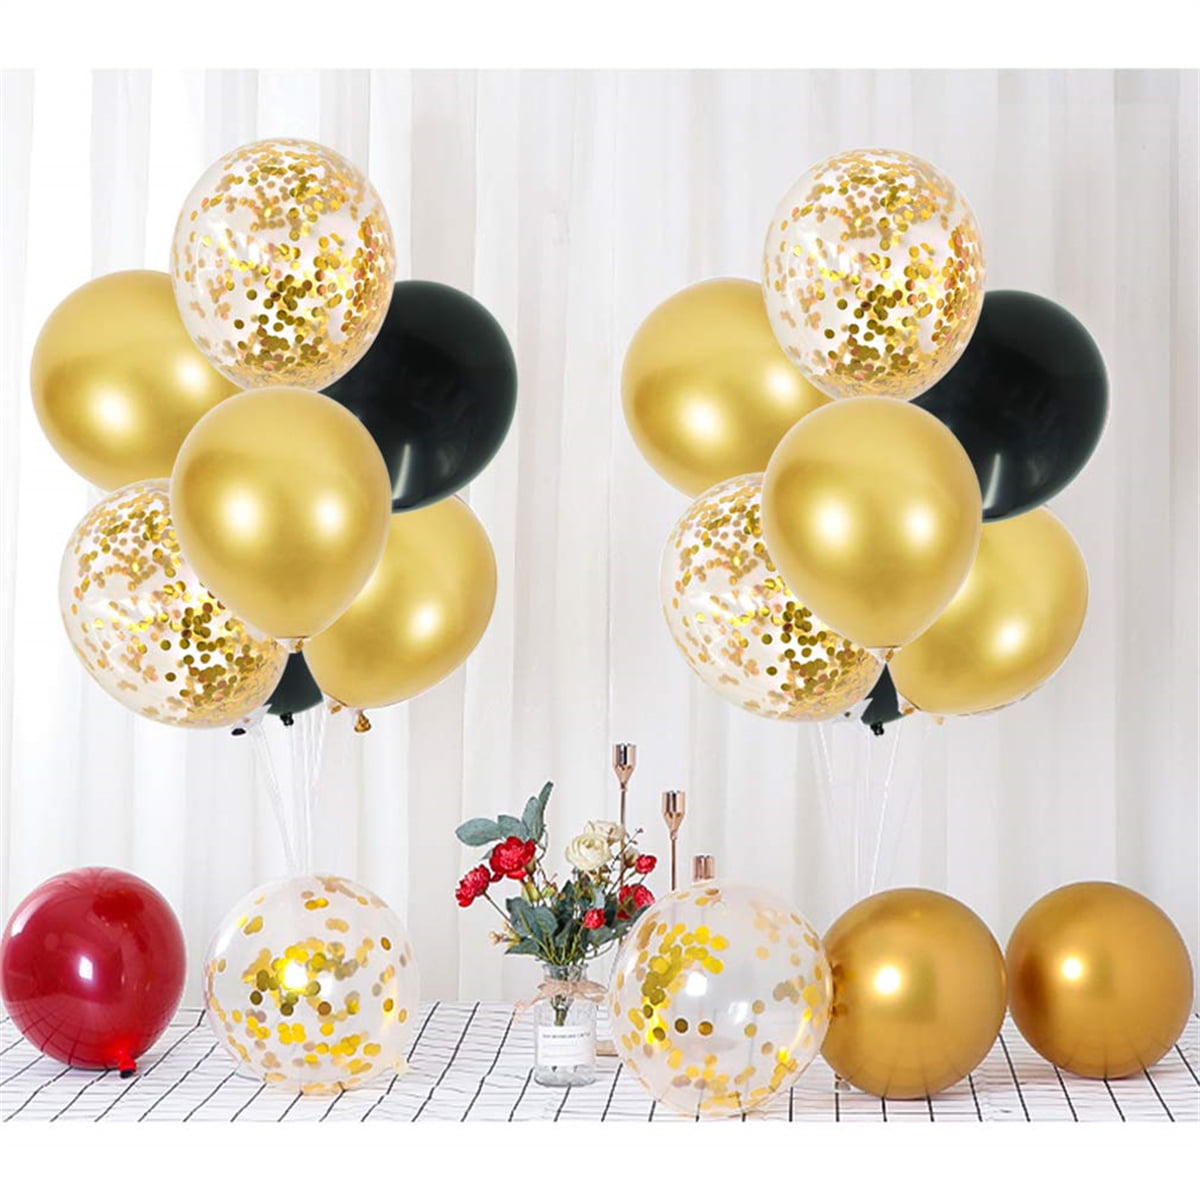 Details about   DIY Balloon Garland Kit Gold Confetti Latex Balloons Party Decoration 